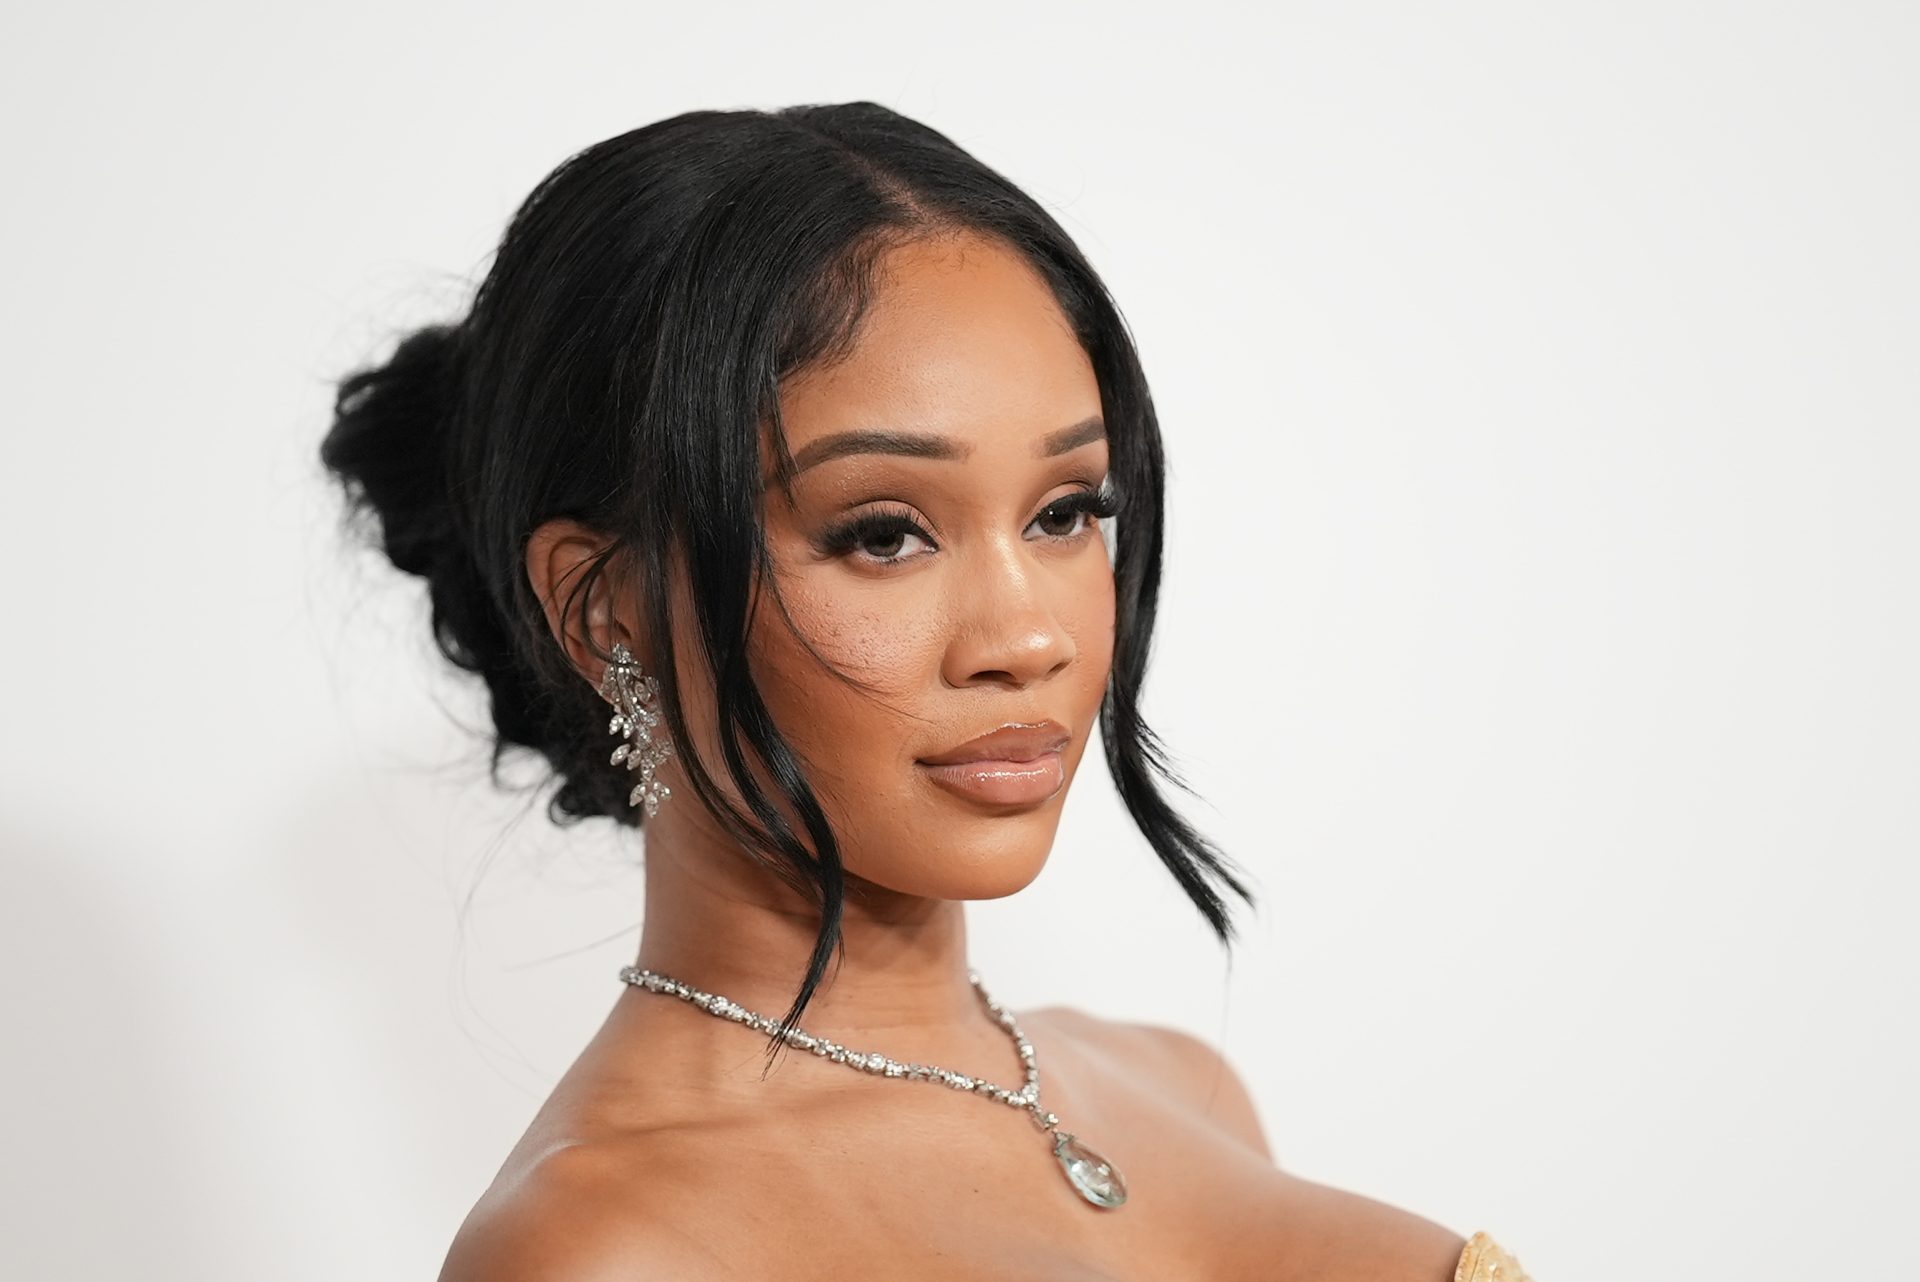 Saweetie Sheds Light On Her Struggle With Insecurities In The Music Industry: “I Just Felt Myself Giving Up”